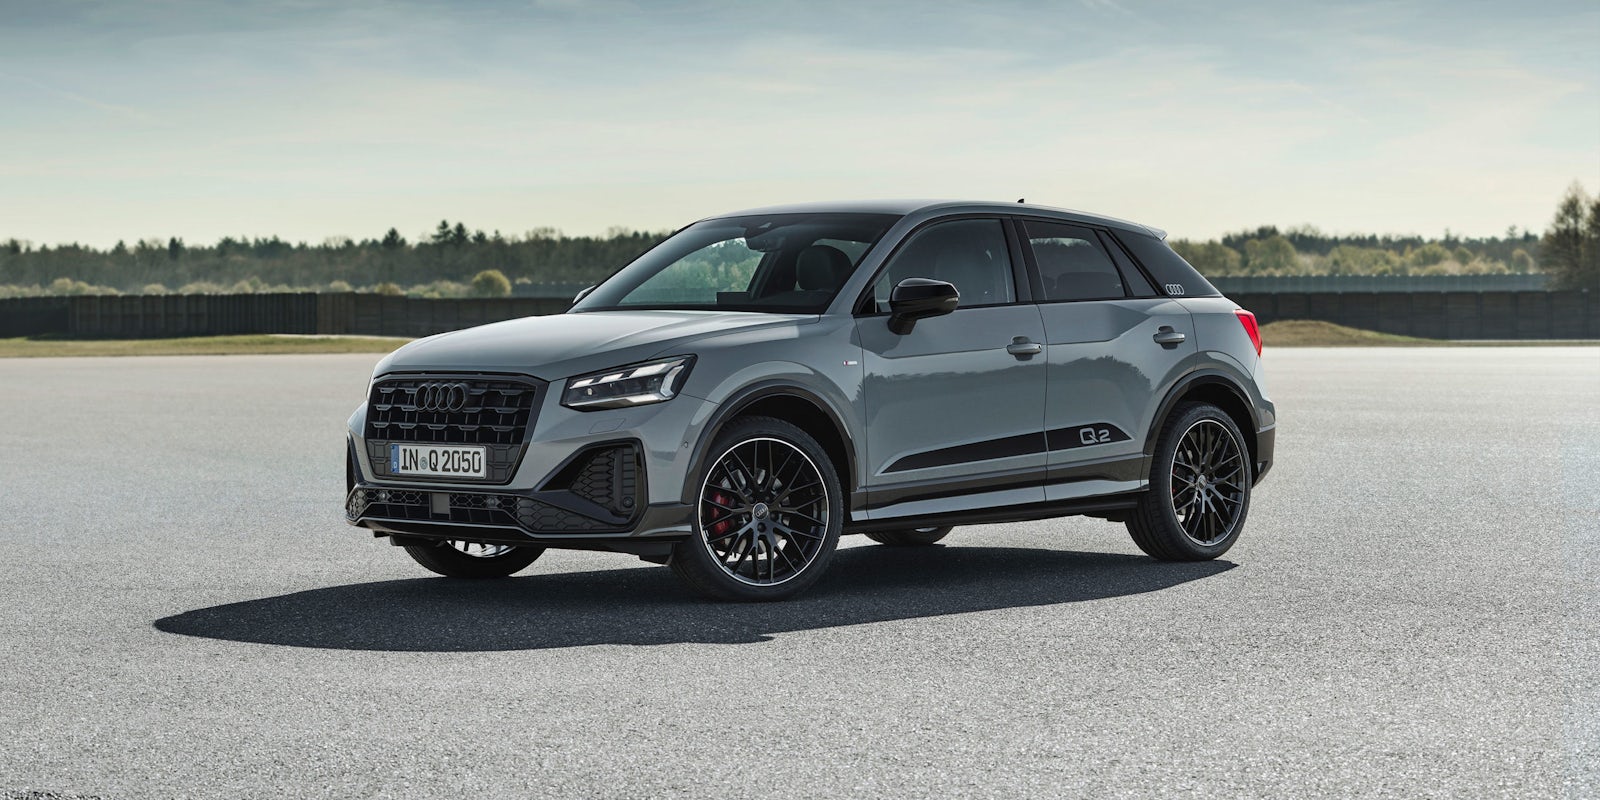 Goederen Premier micro 2021 Audi Q2 updates revealed: price, specs and release date | carwow